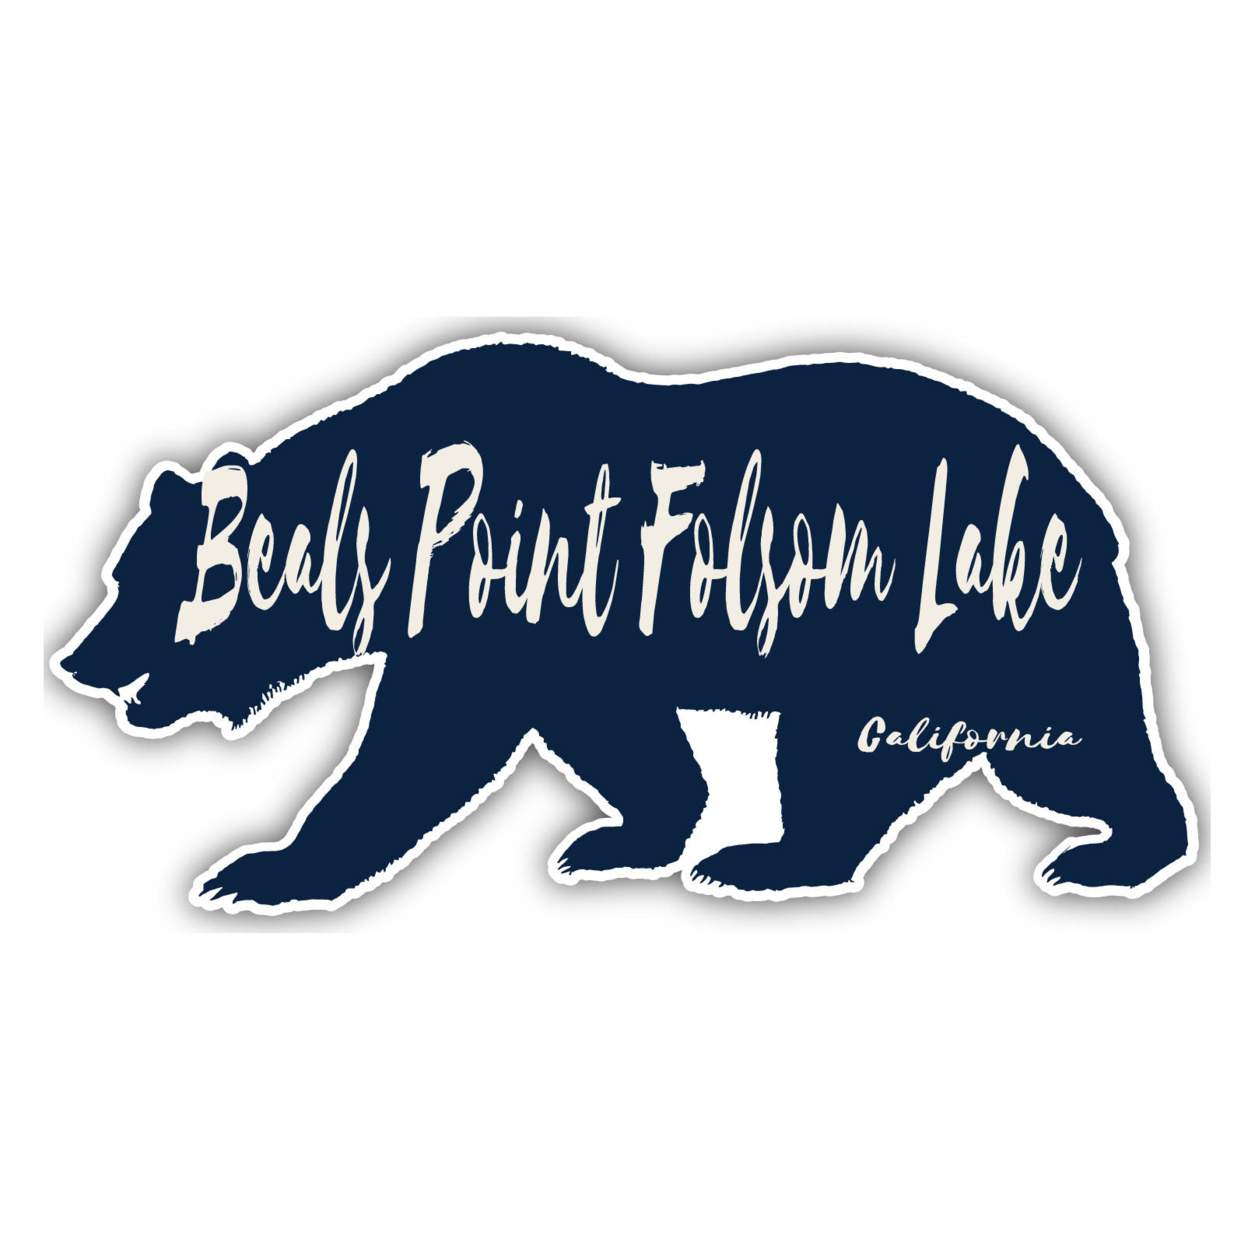 Beals Point Folsom Lake California Souvenir Decorative Stickers (Choose Theme And Size) - Single Unit, 10-Inch, Camp Life